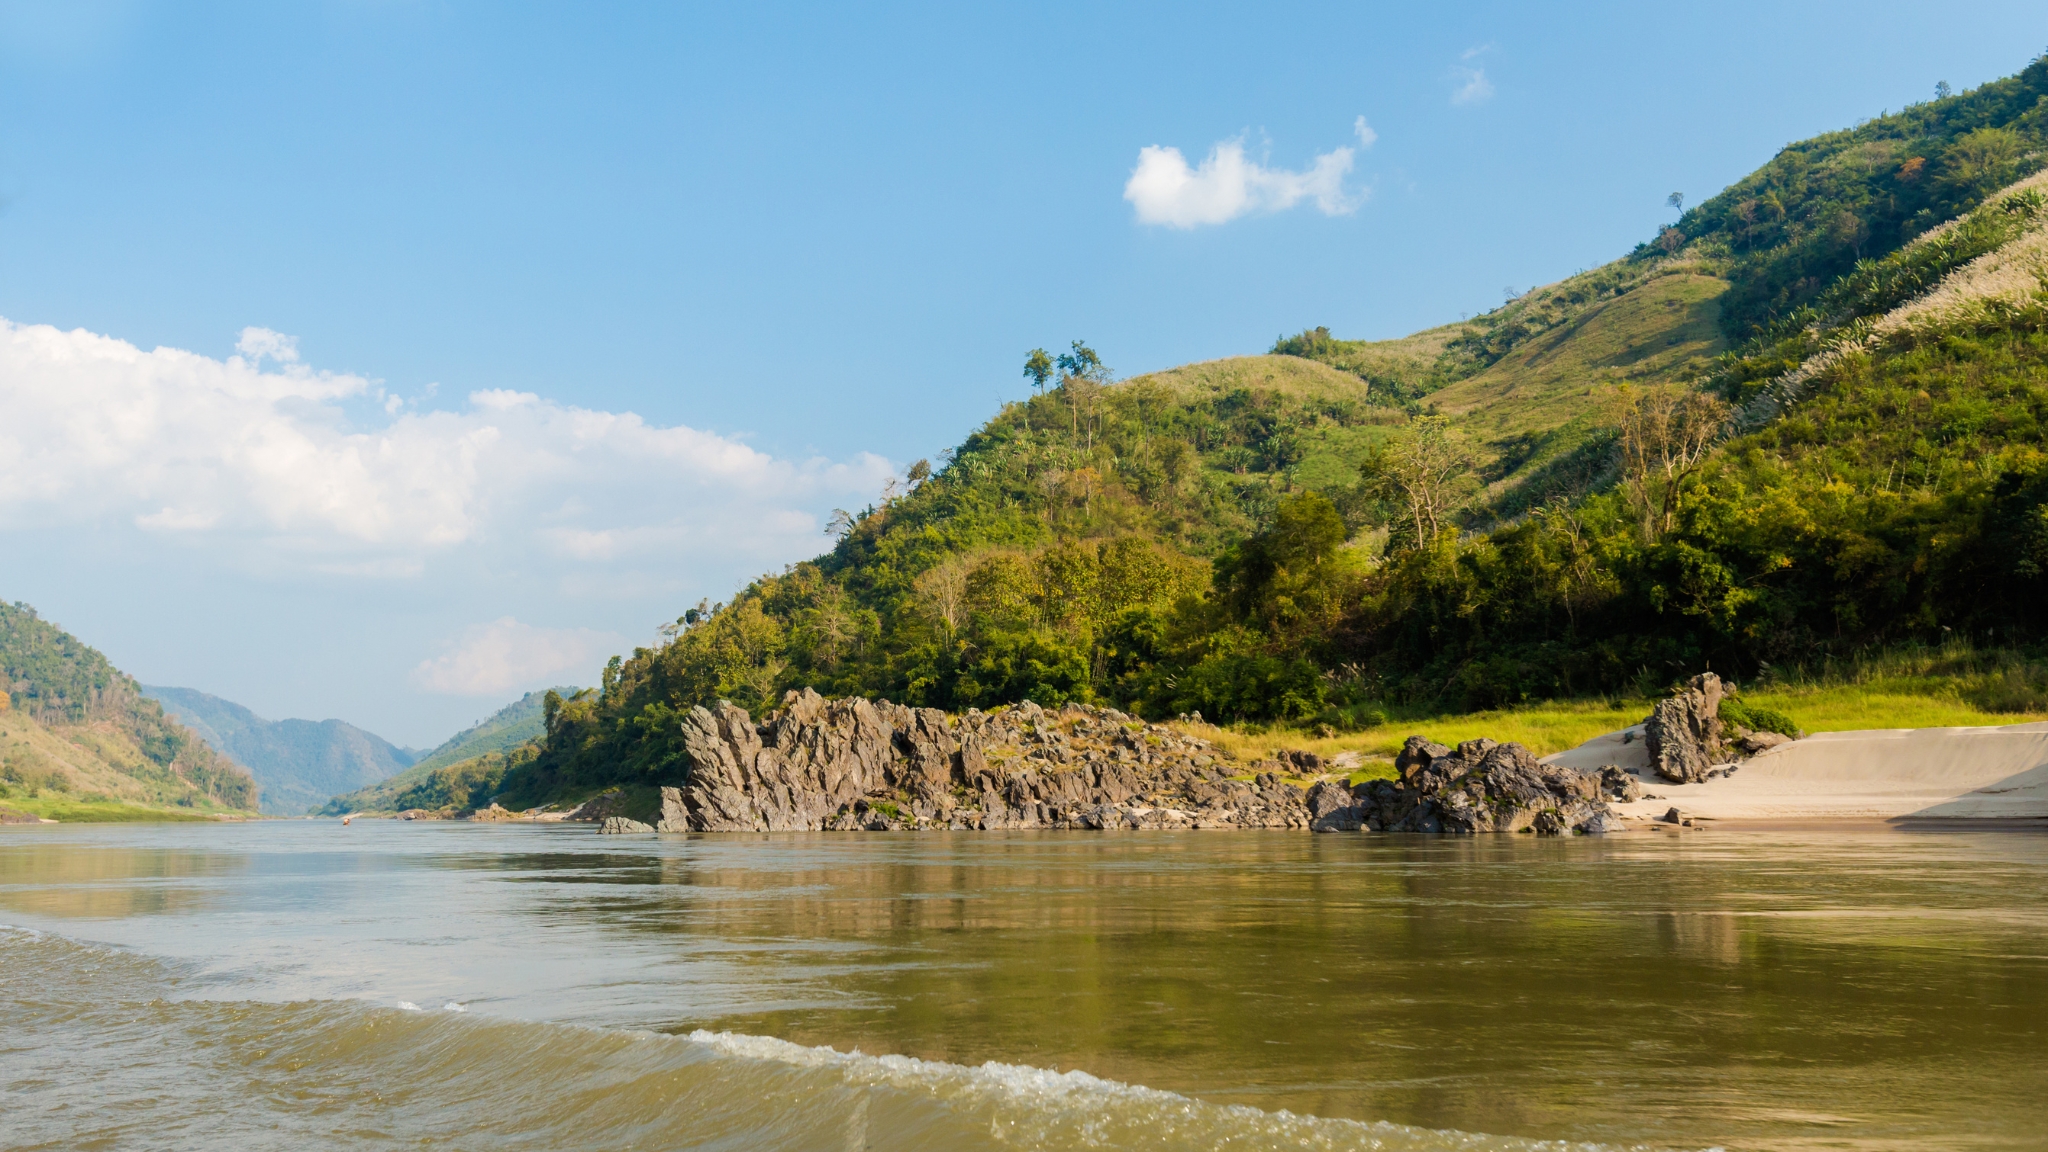 Picturesque Scenery Of The Mekong River